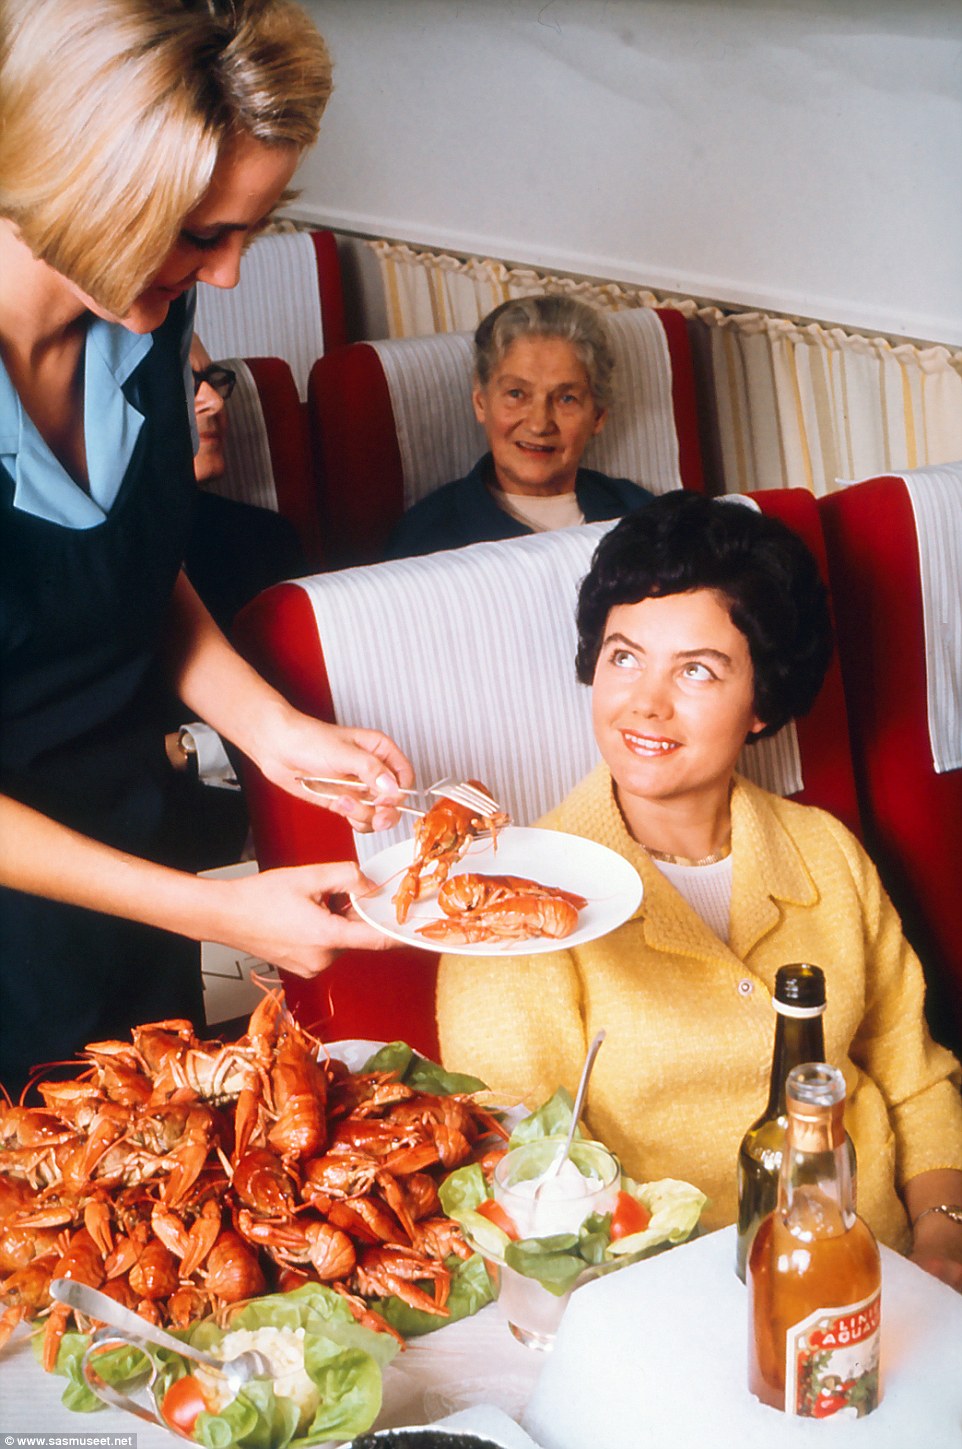 In this undated photograph, a passenger is being served fresh Norwegian lobsters with their shell still on. Two aperitifs are set on ice next to the rest of the shell fish on the trolley